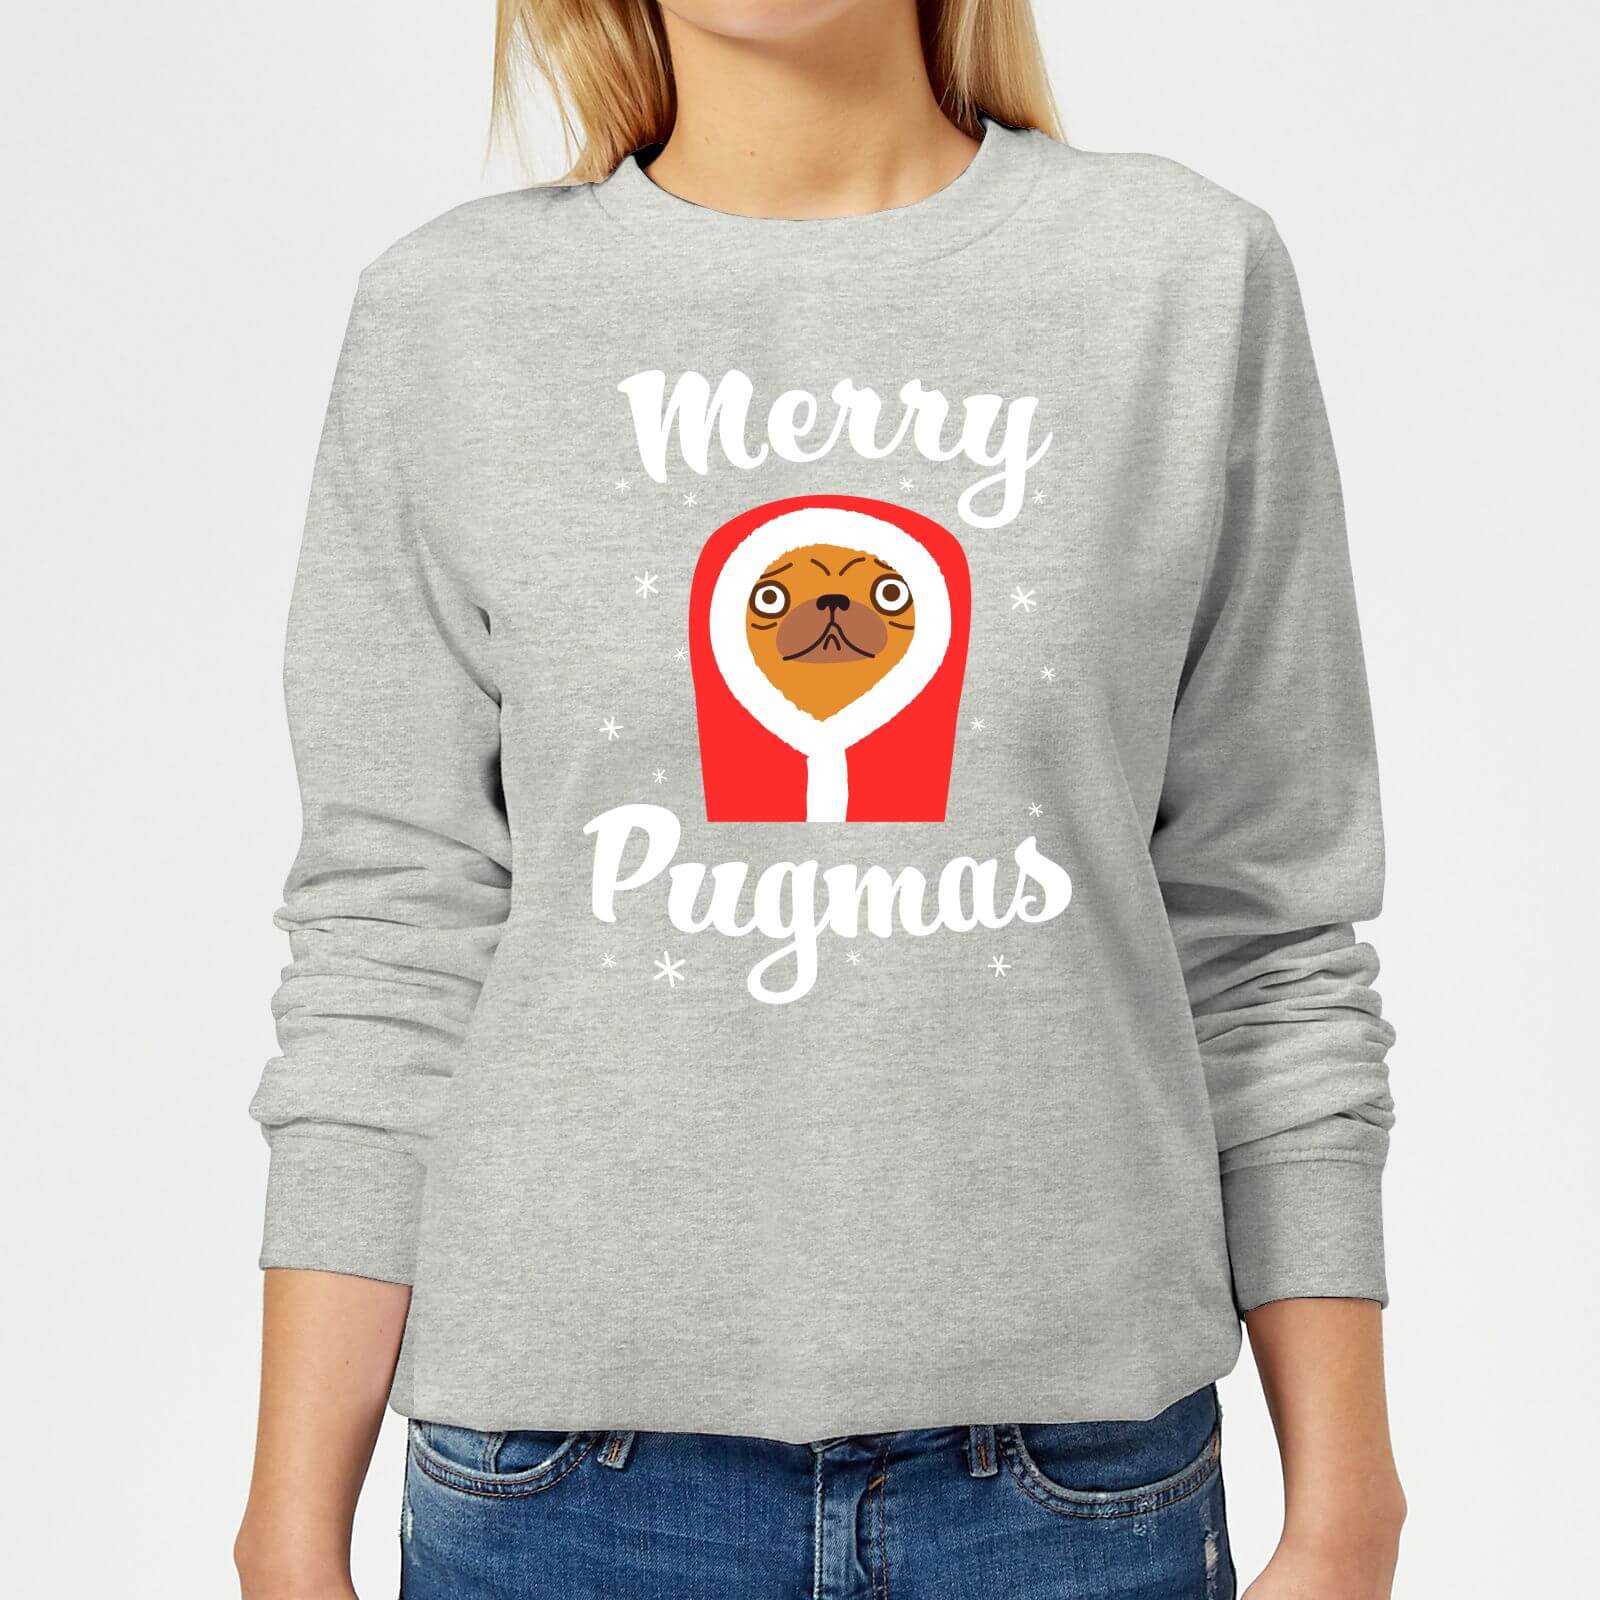 The Christmas Collection Merry pugmas women's christmas jumper - grey - xl